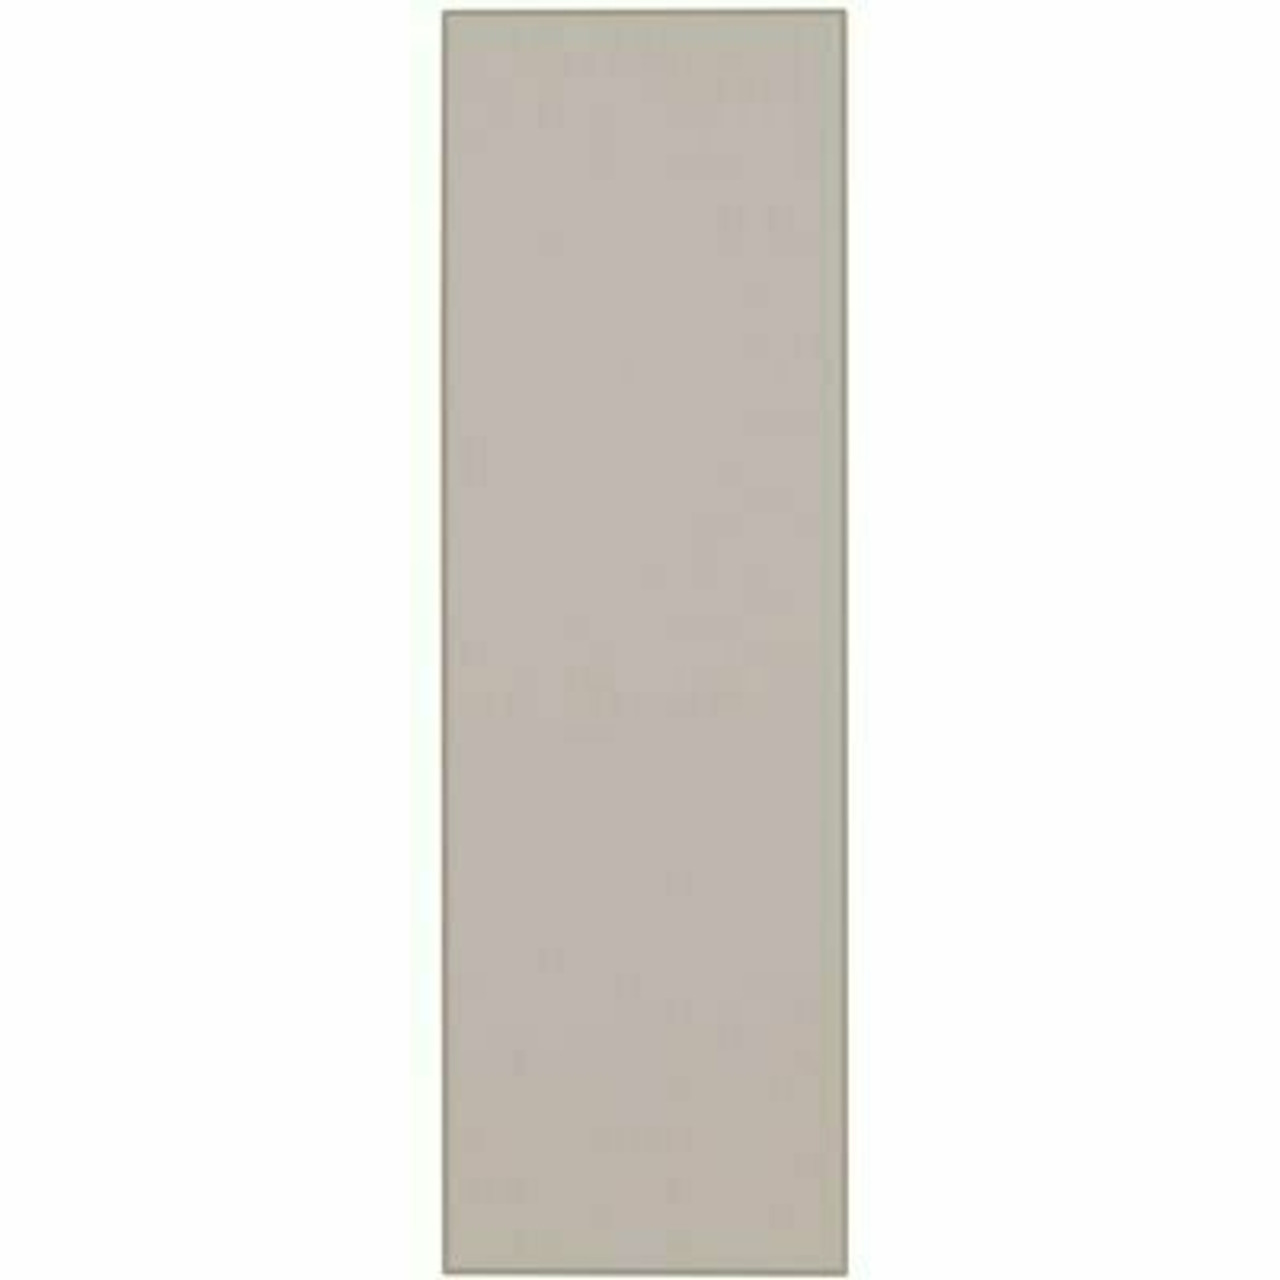 Hampton Bay 0.1875X42X11.25 In. Cabinet End Panel In Dove Gray (2-Pack)